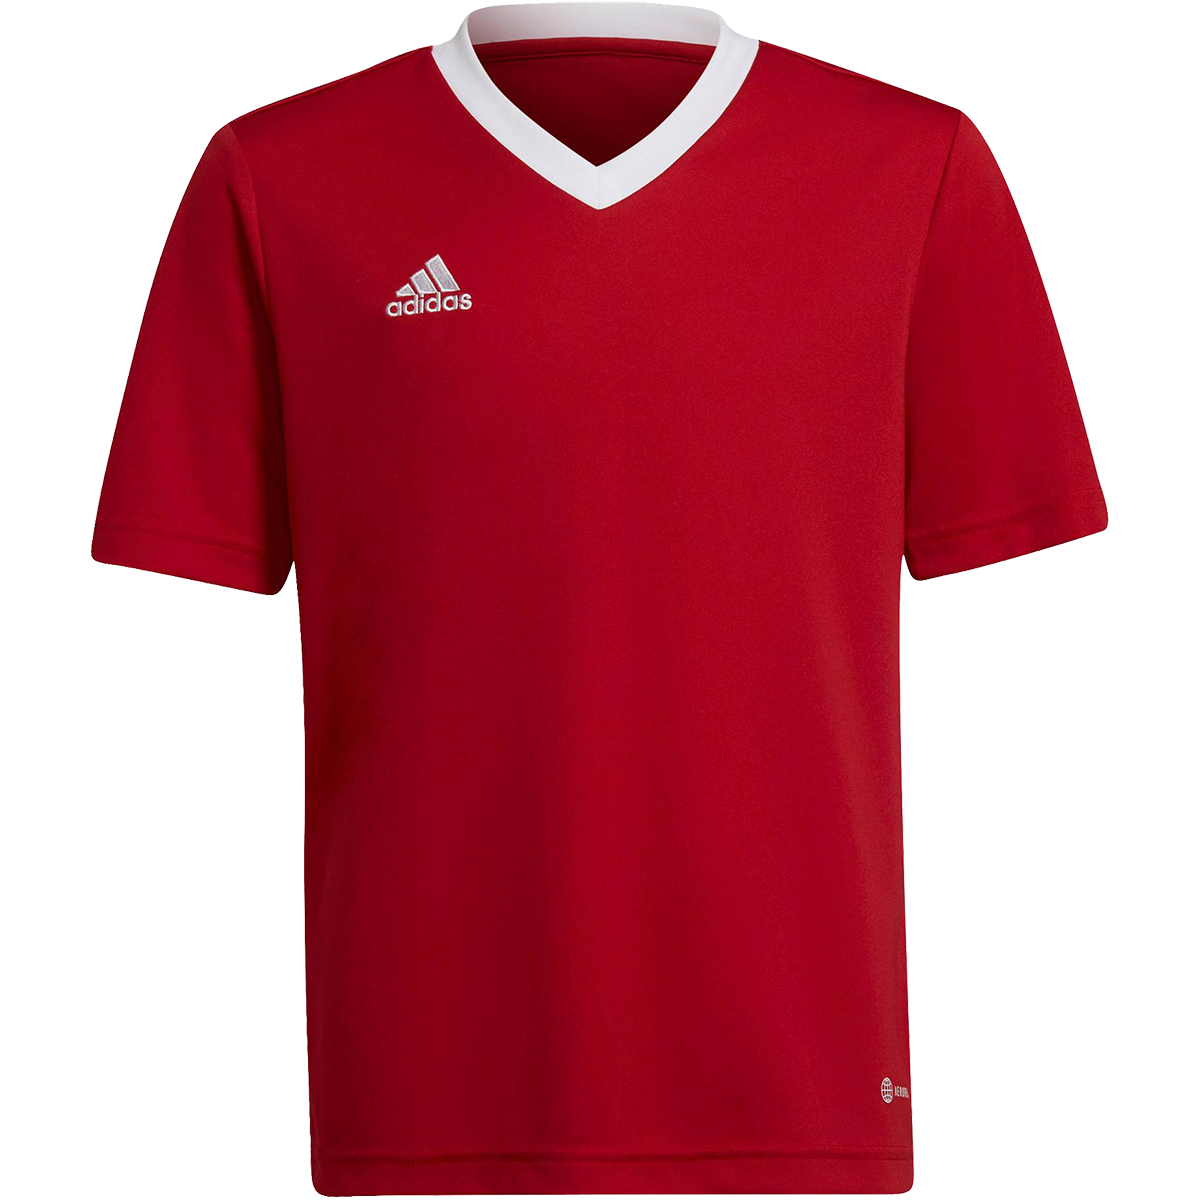 Youth Entrada 22 Jersey alternate view